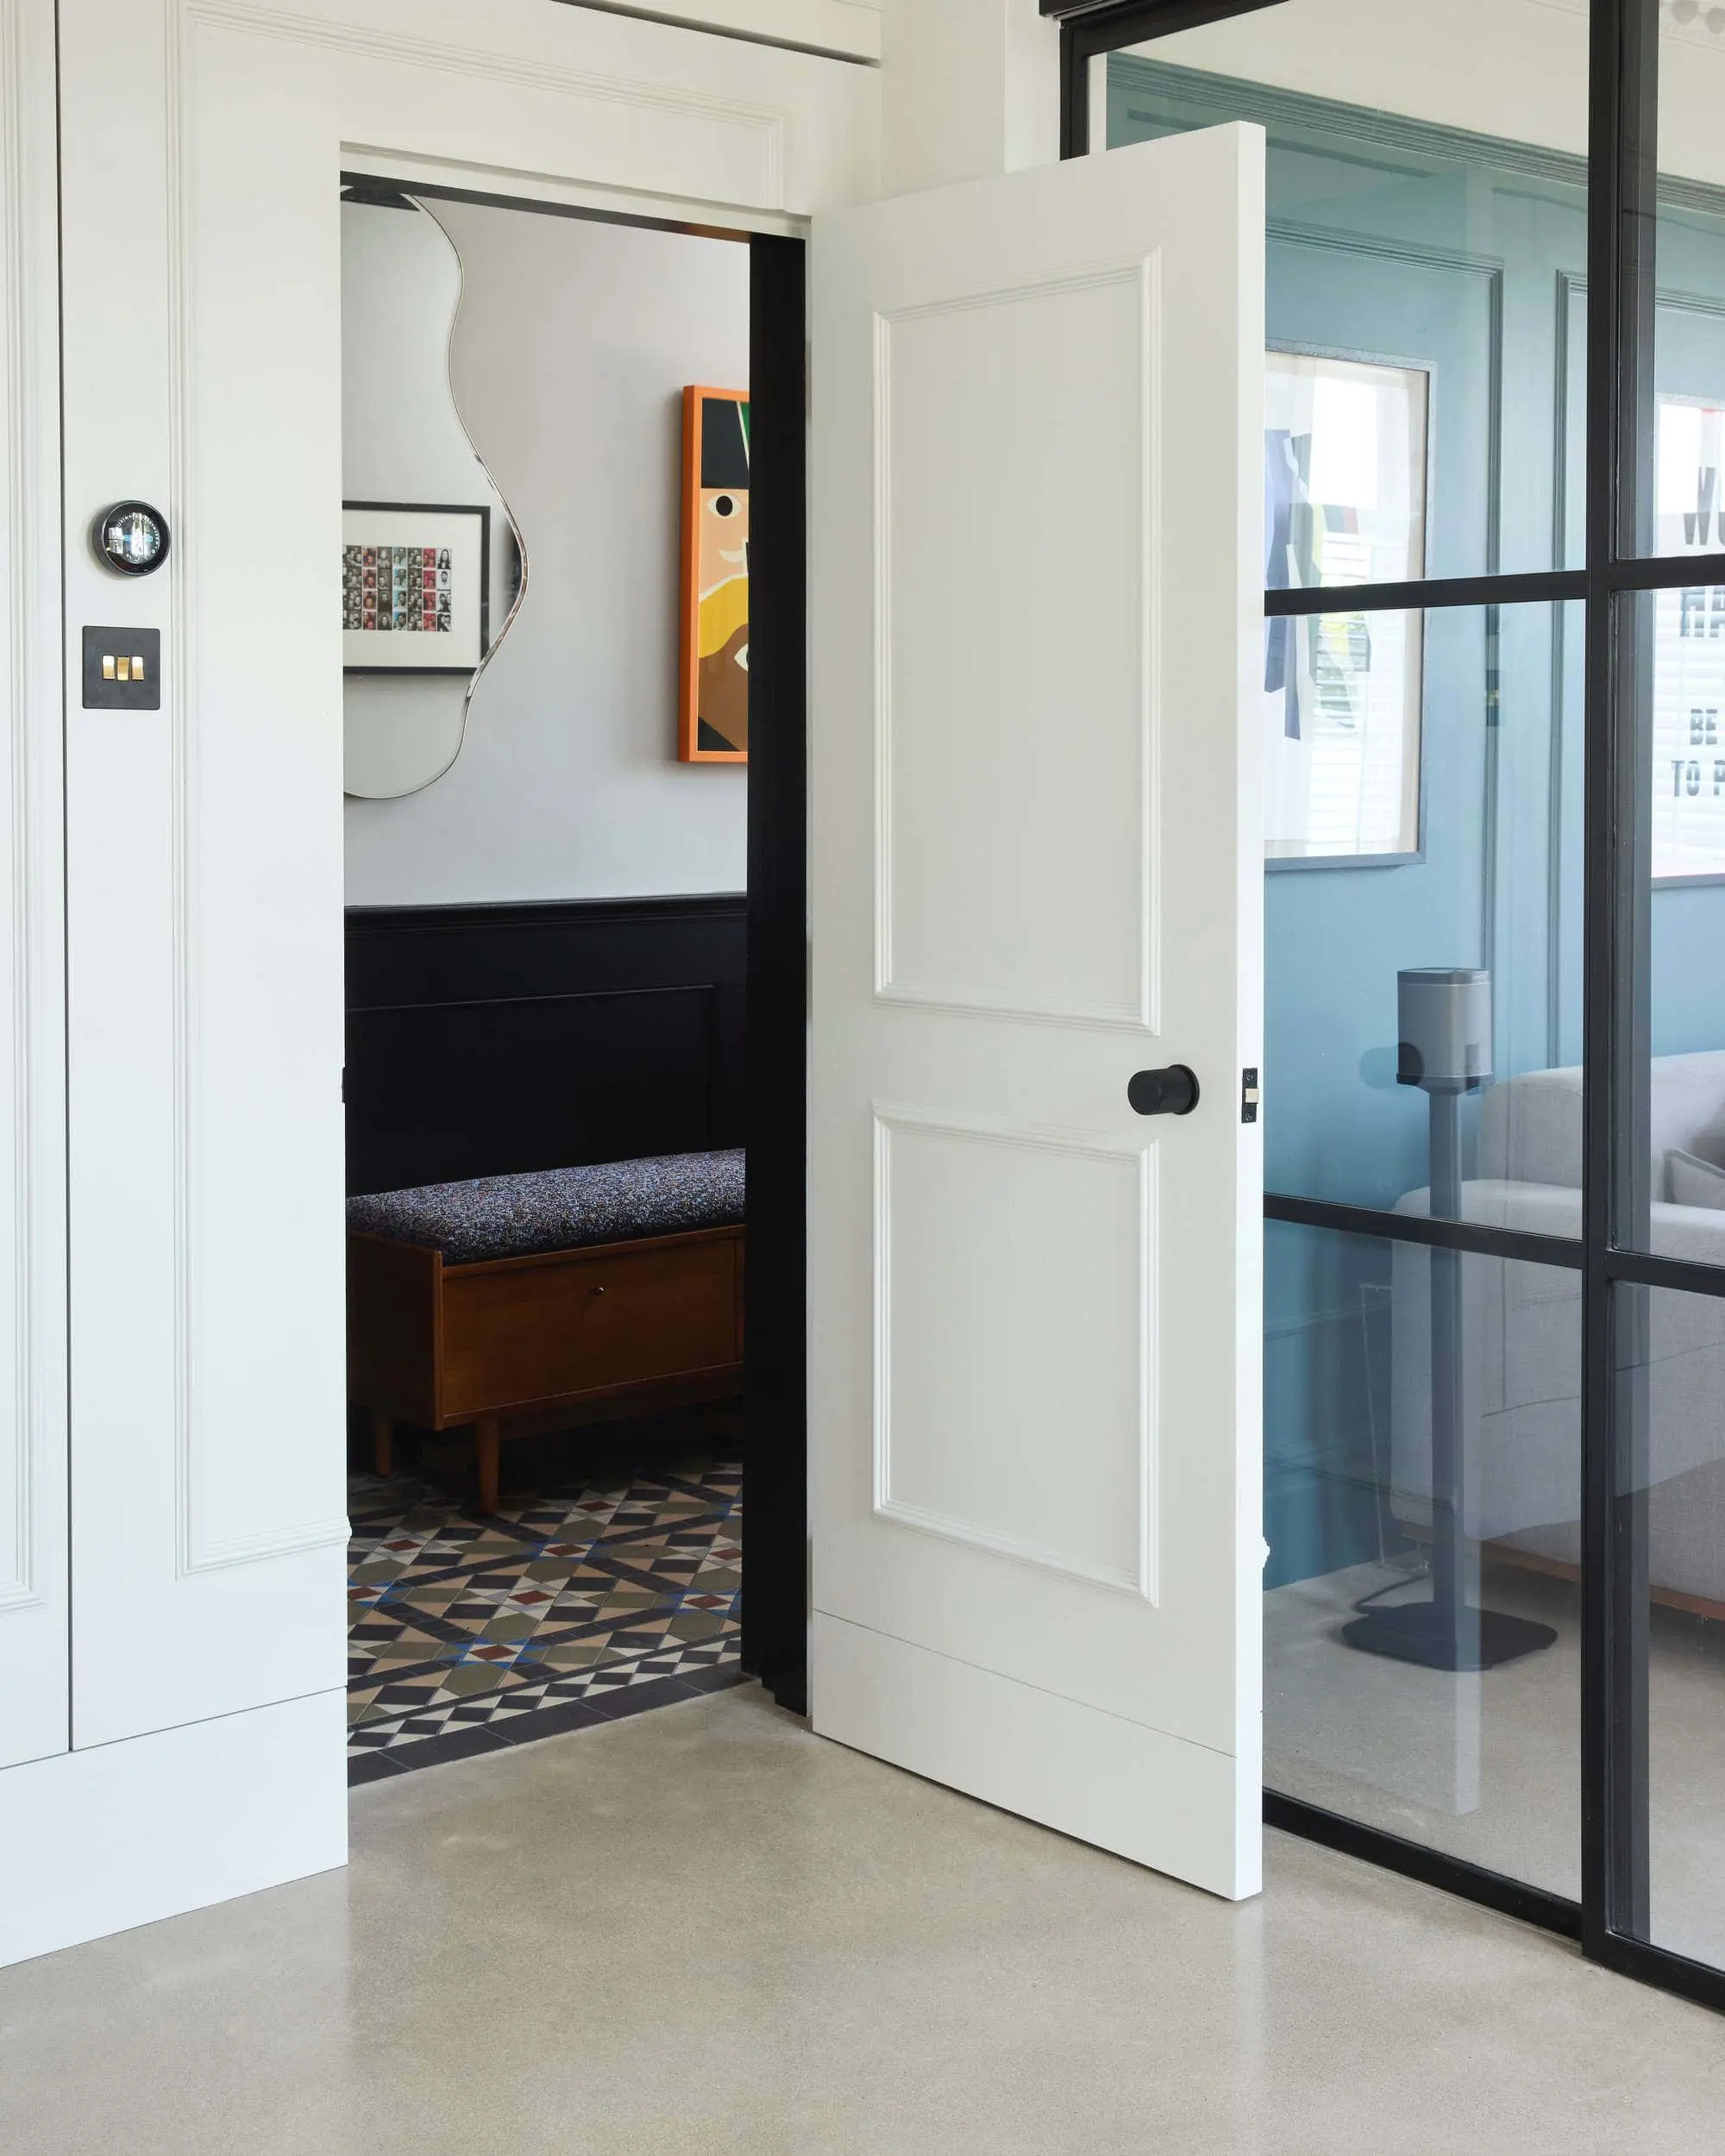 Interior door with the Crittall glazing bars in the backdrop.